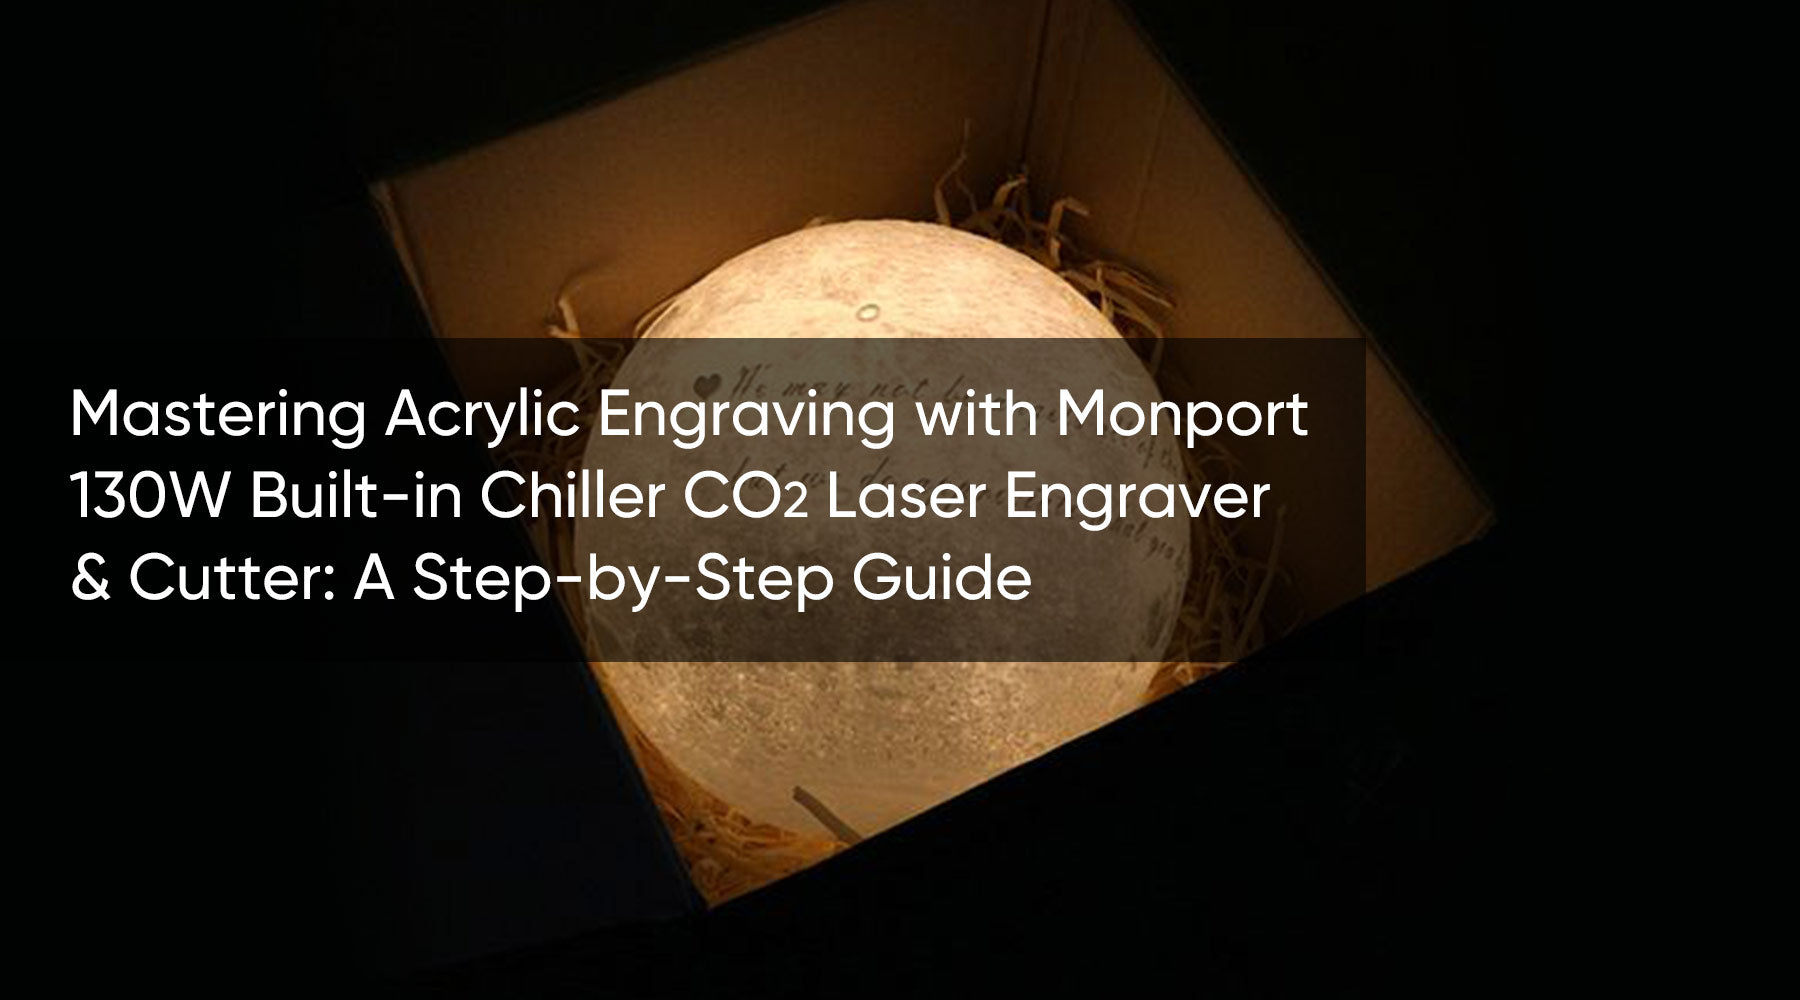 Mastering How to Engrave Acrylic Laser: A Step-by-Step Guide